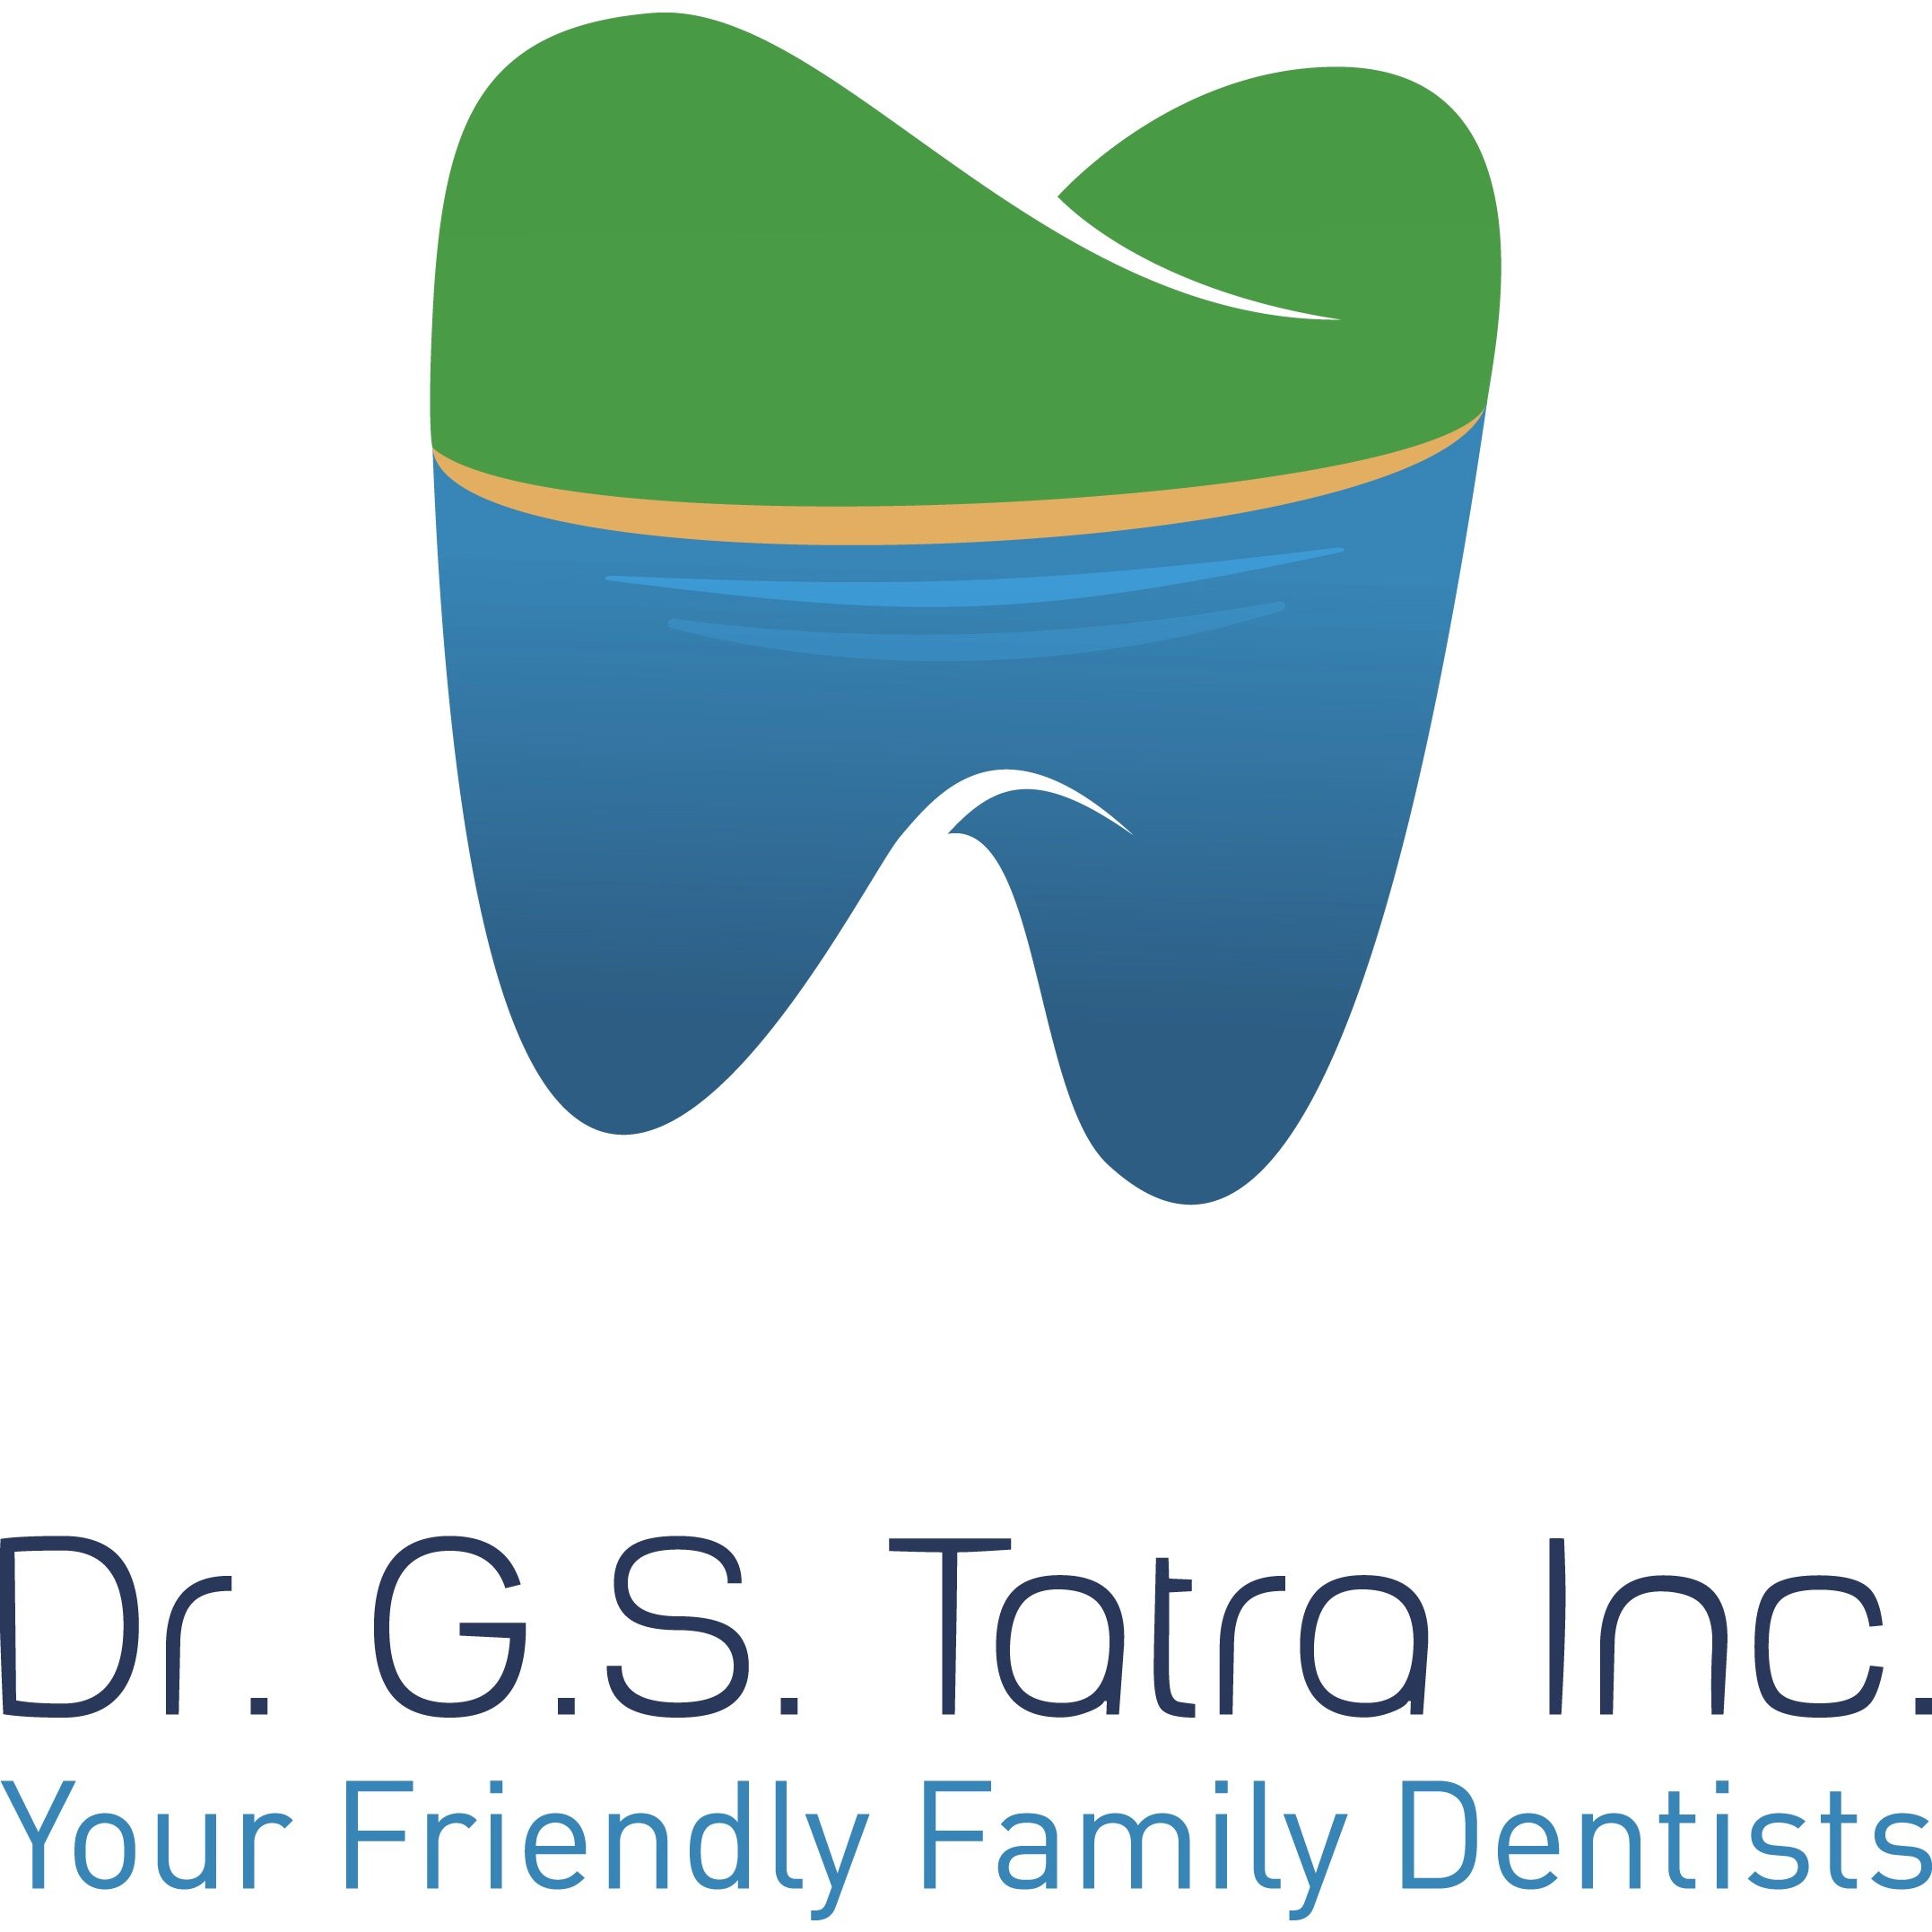 Your #YYJ Family Friendly Dentists
https://t.co/oxBXOMJSSq